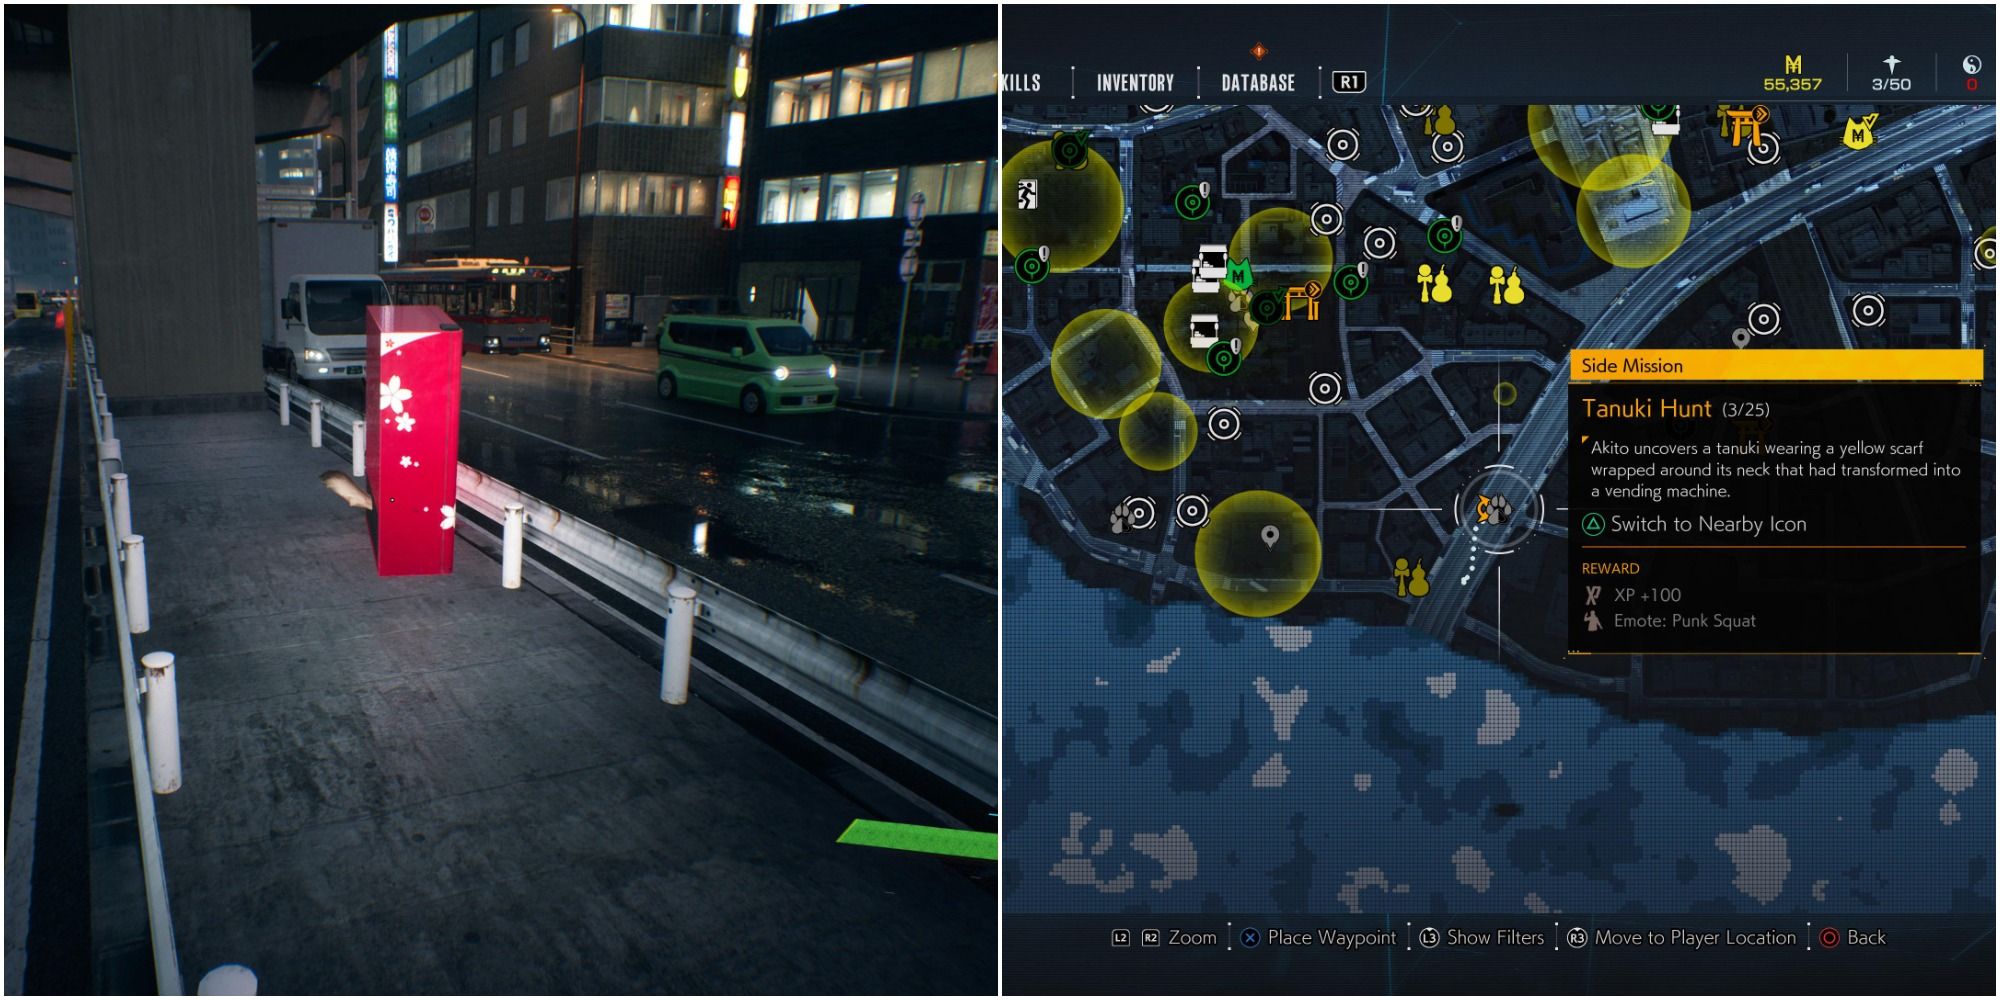 Ghostwire Tokyo Collage - tanuki location map and vending machine